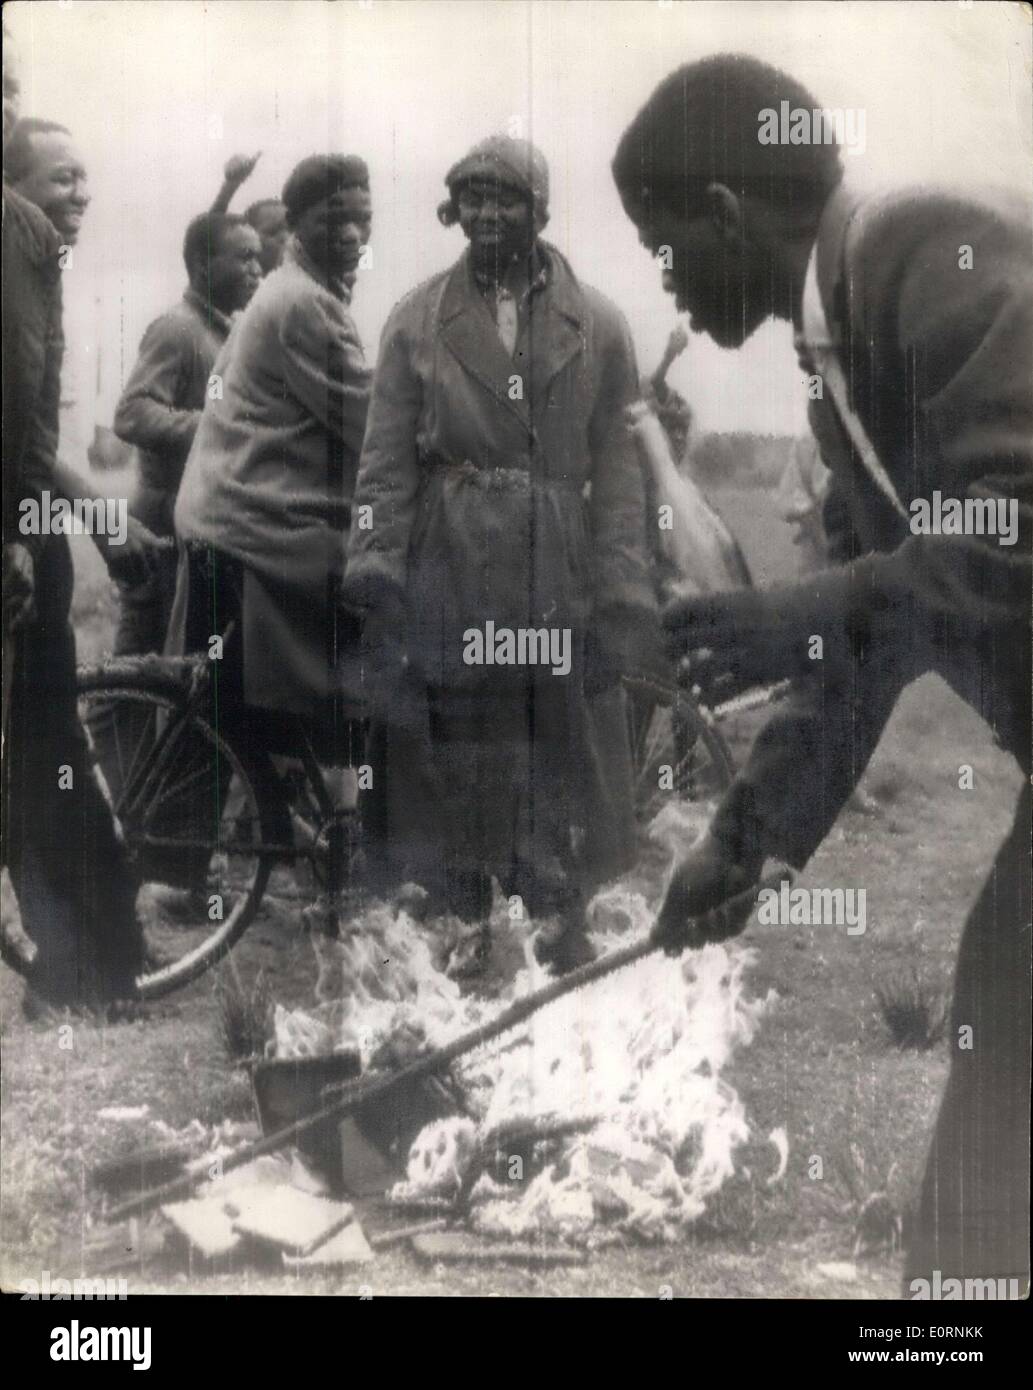 Mar. 28, 1960 - Natives Burn Their Was Pass Books: Africans today made a bonfire of their pass books as they marked a day of mourning for the 71 victims of last Monday's police shootings. The burning from the recent announcement of the suspension of the 'Pass' Law. Photo Shows The scene as natives burned their pass-books Orlando today - after the recent auspension of the 'Pass' Law. Stock Photo